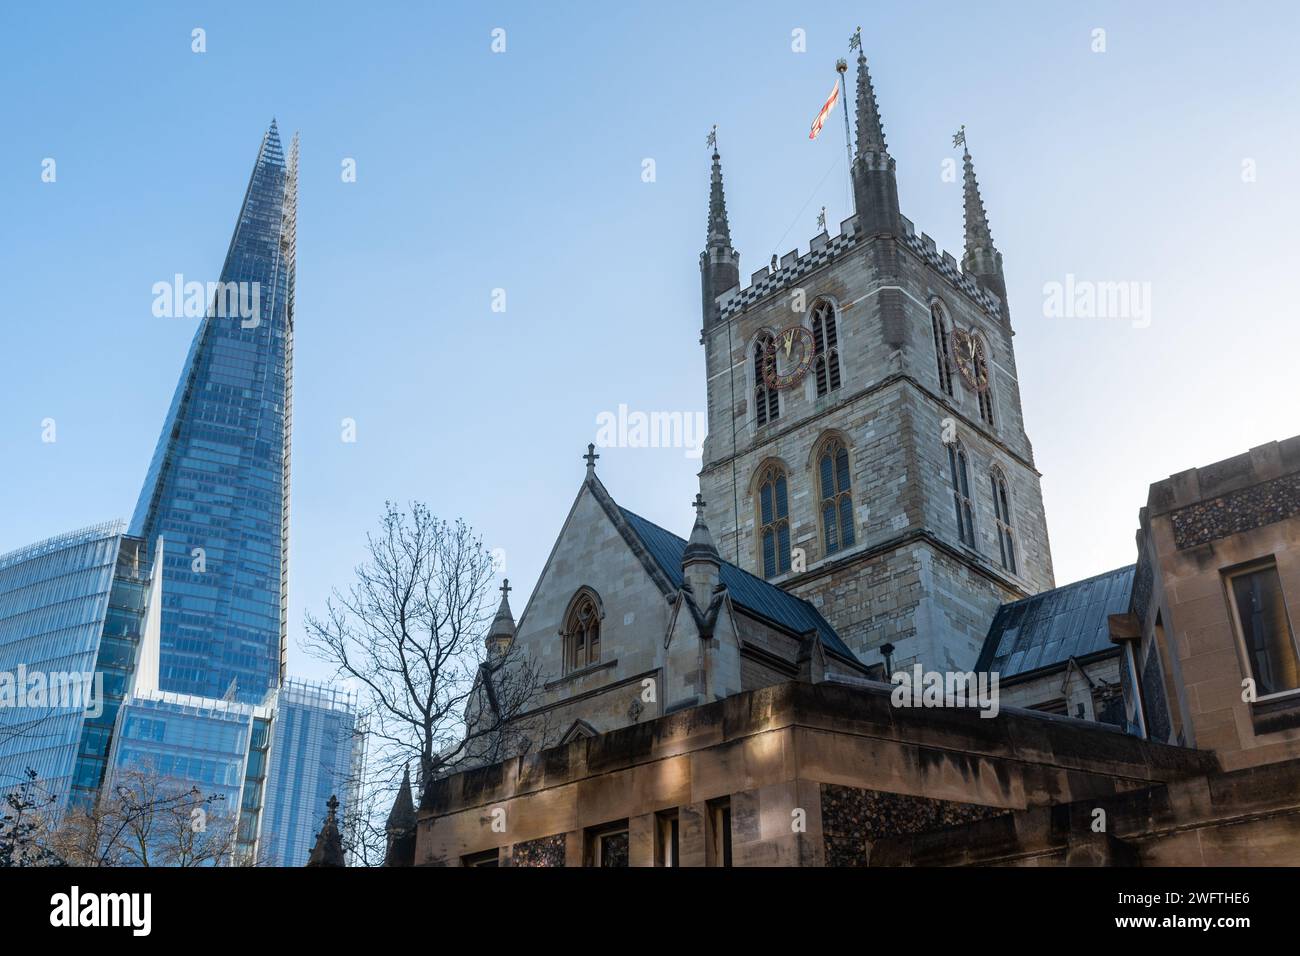 View of The Shard and Southwark Cathedral, modern and old architecture buildings, London, England, UK Stock Photo